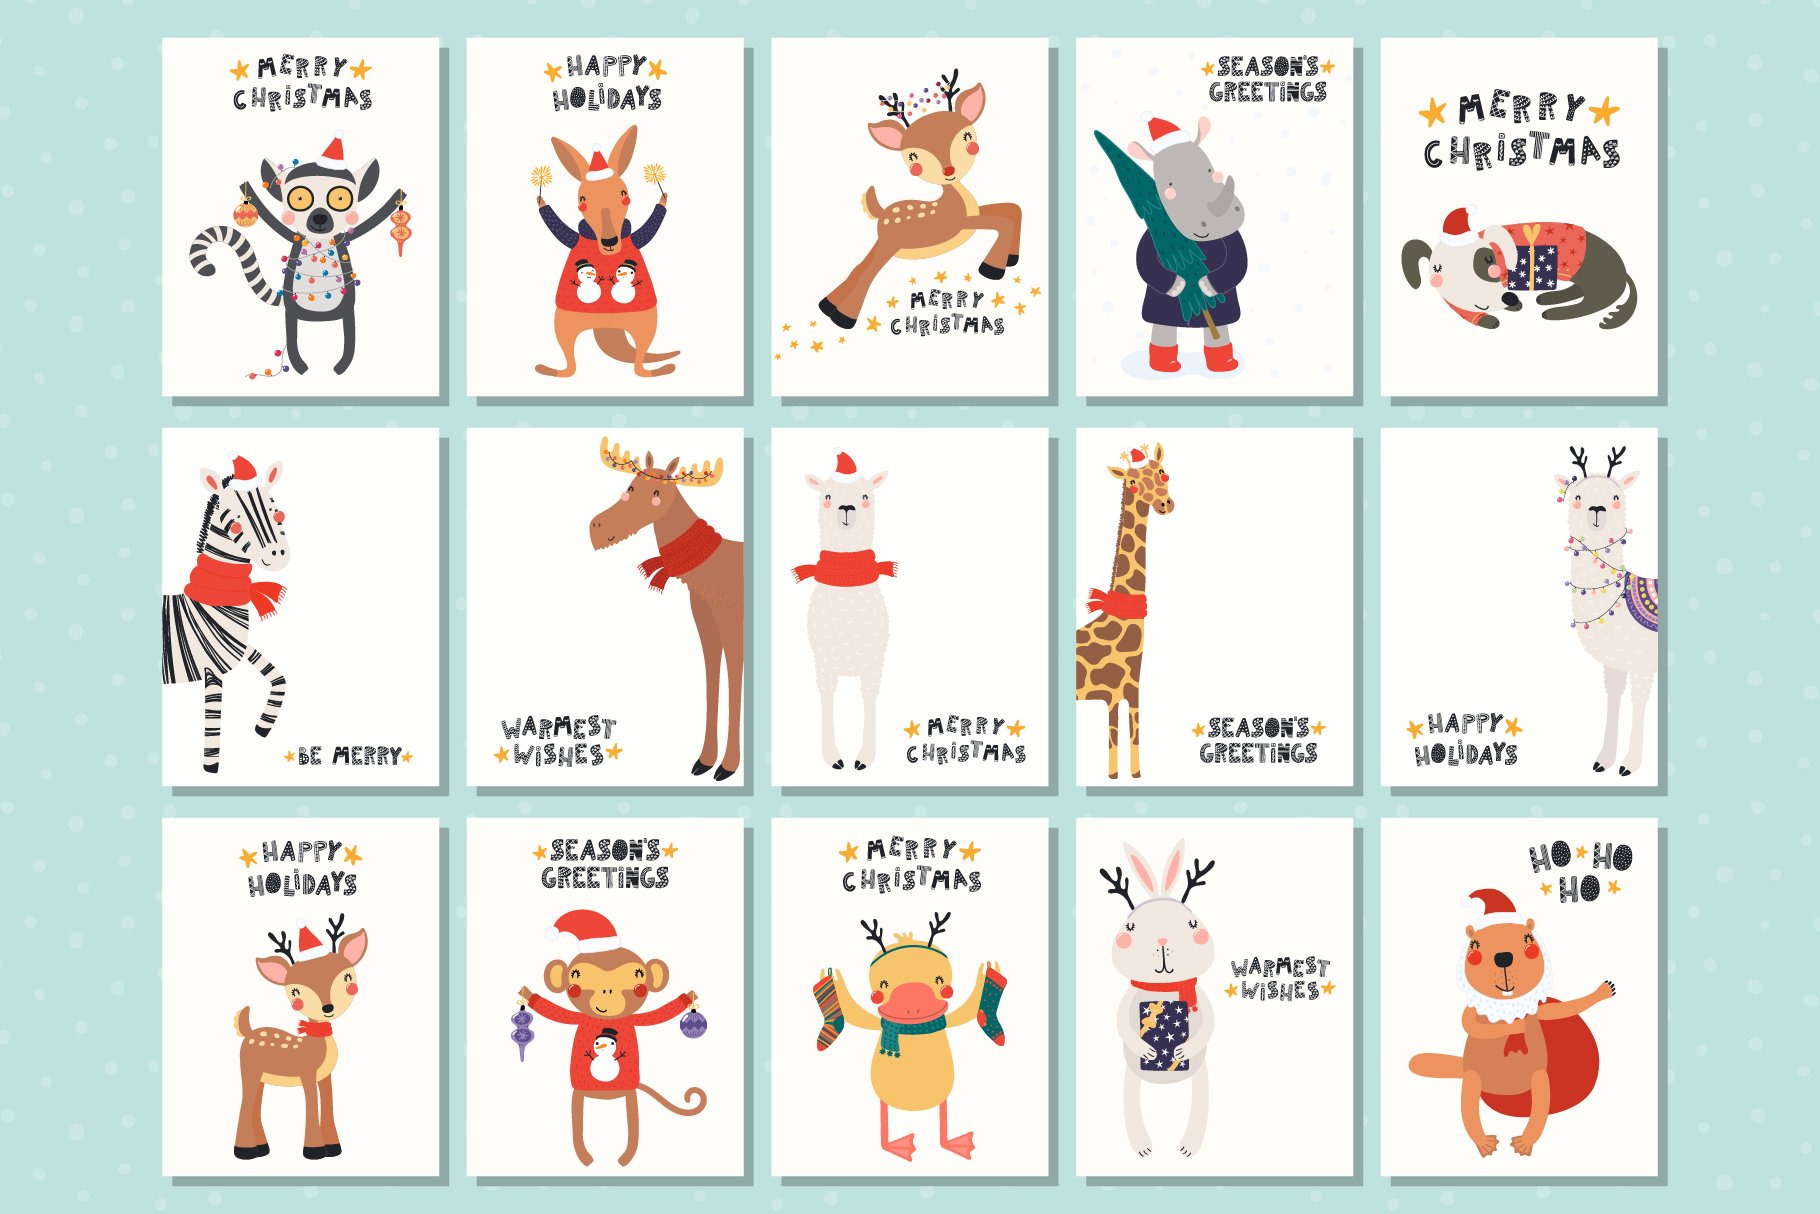 Diverse of animals characters on Christmas cards.